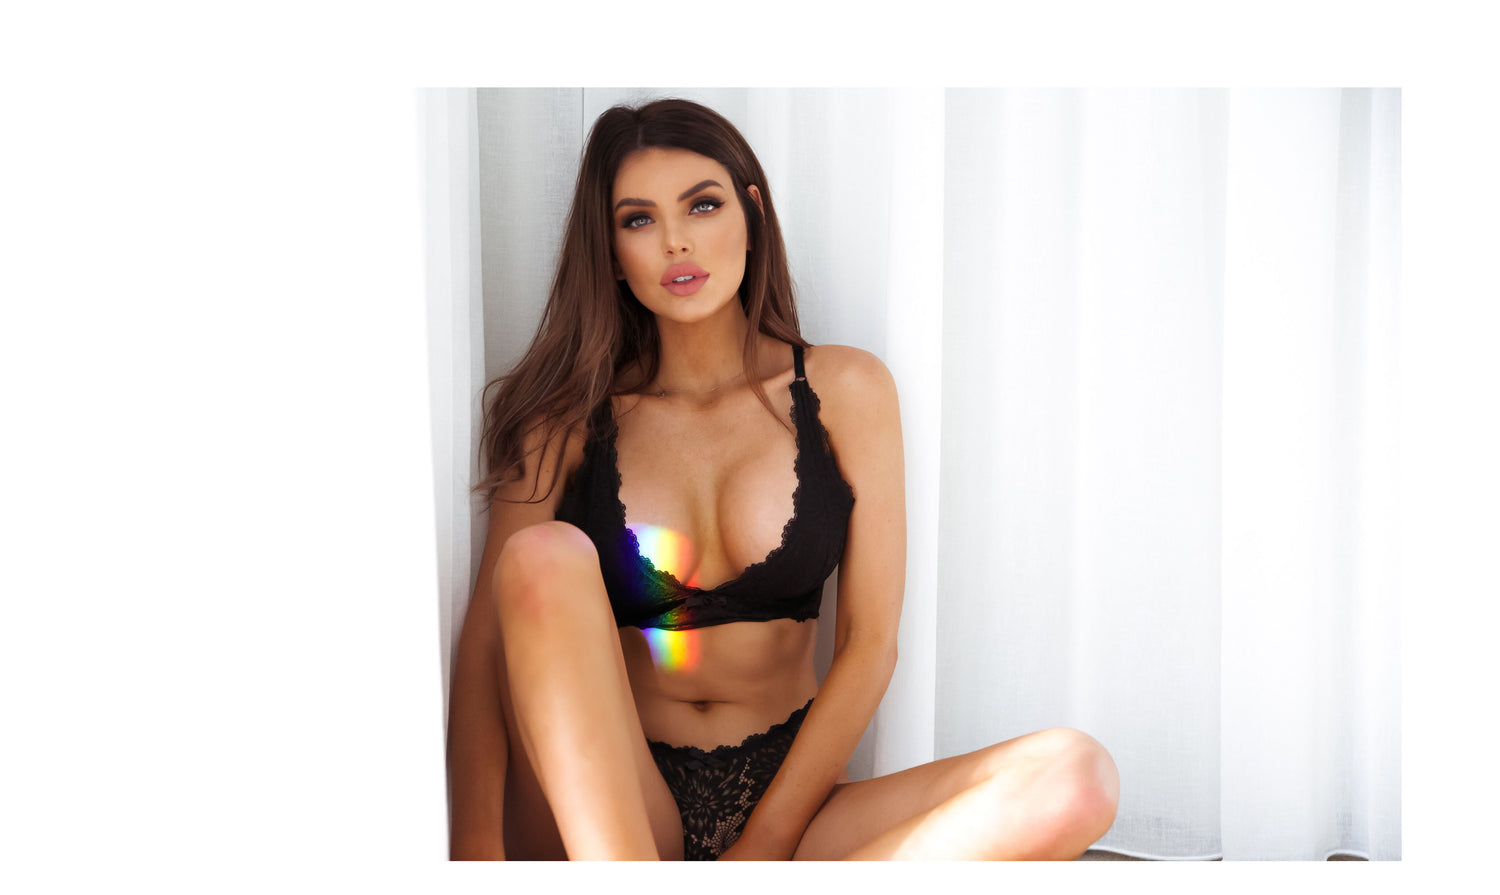 5 minutes with Nicole Thorne